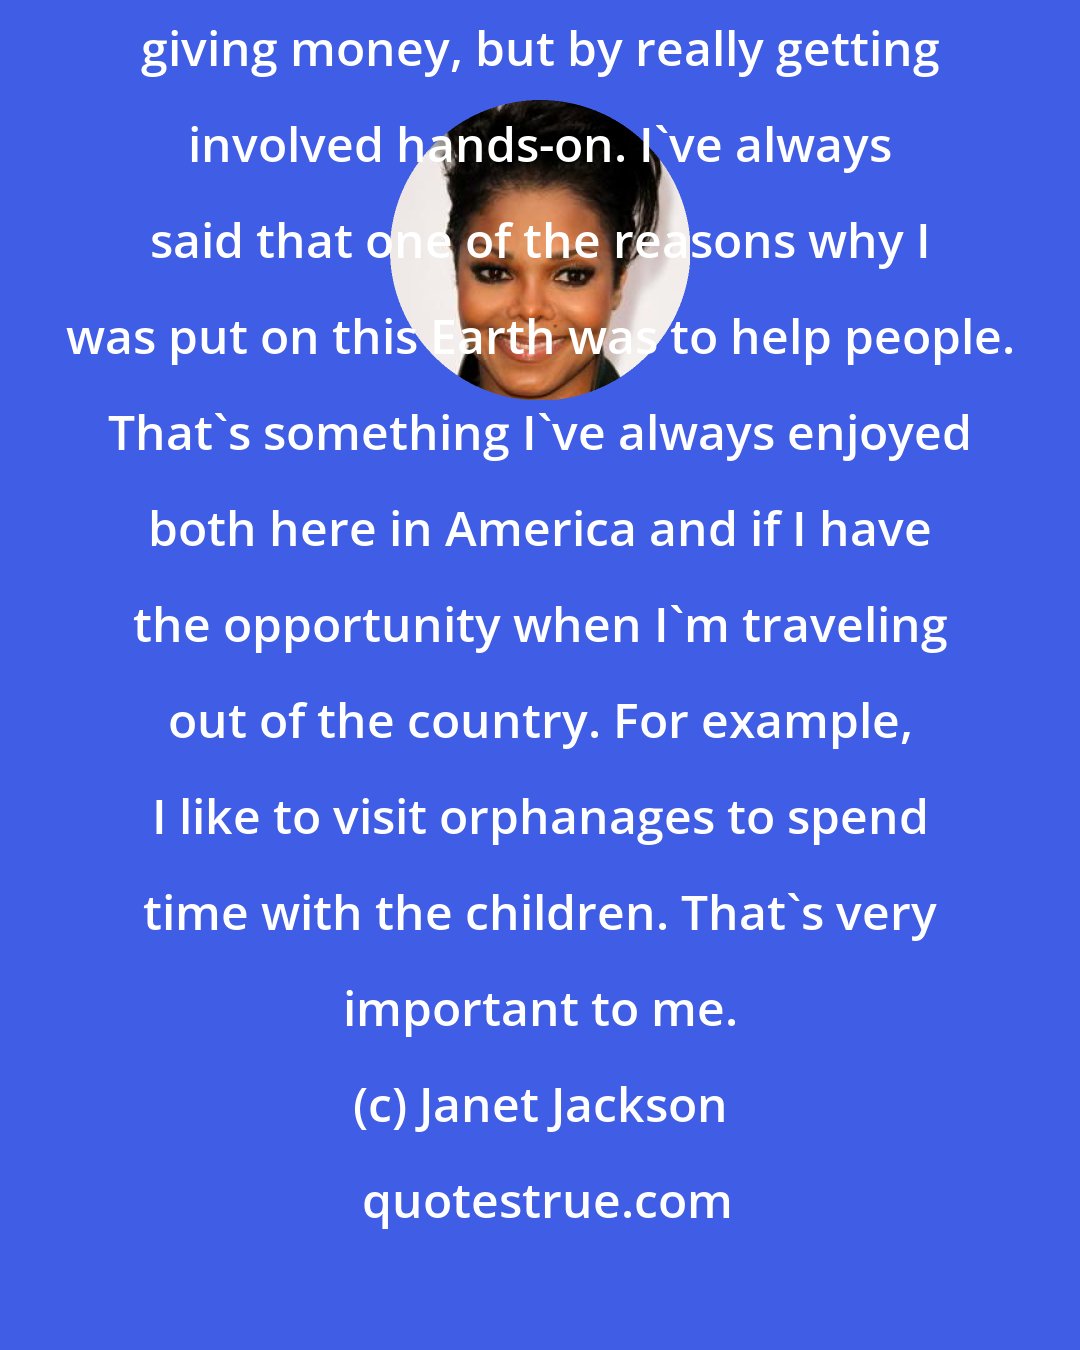 Janet Jackson: I work with a lot of different charities, and by that I don't mean merely by giving money, but by really getting involved hands-on. I've always said that one of the reasons why I was put on this Earth was to help people. That's something I've always enjoyed both here in America and if I have the opportunity when I'm traveling out of the country. For example, I like to visit orphanages to spend time with the children. That's very important to me.